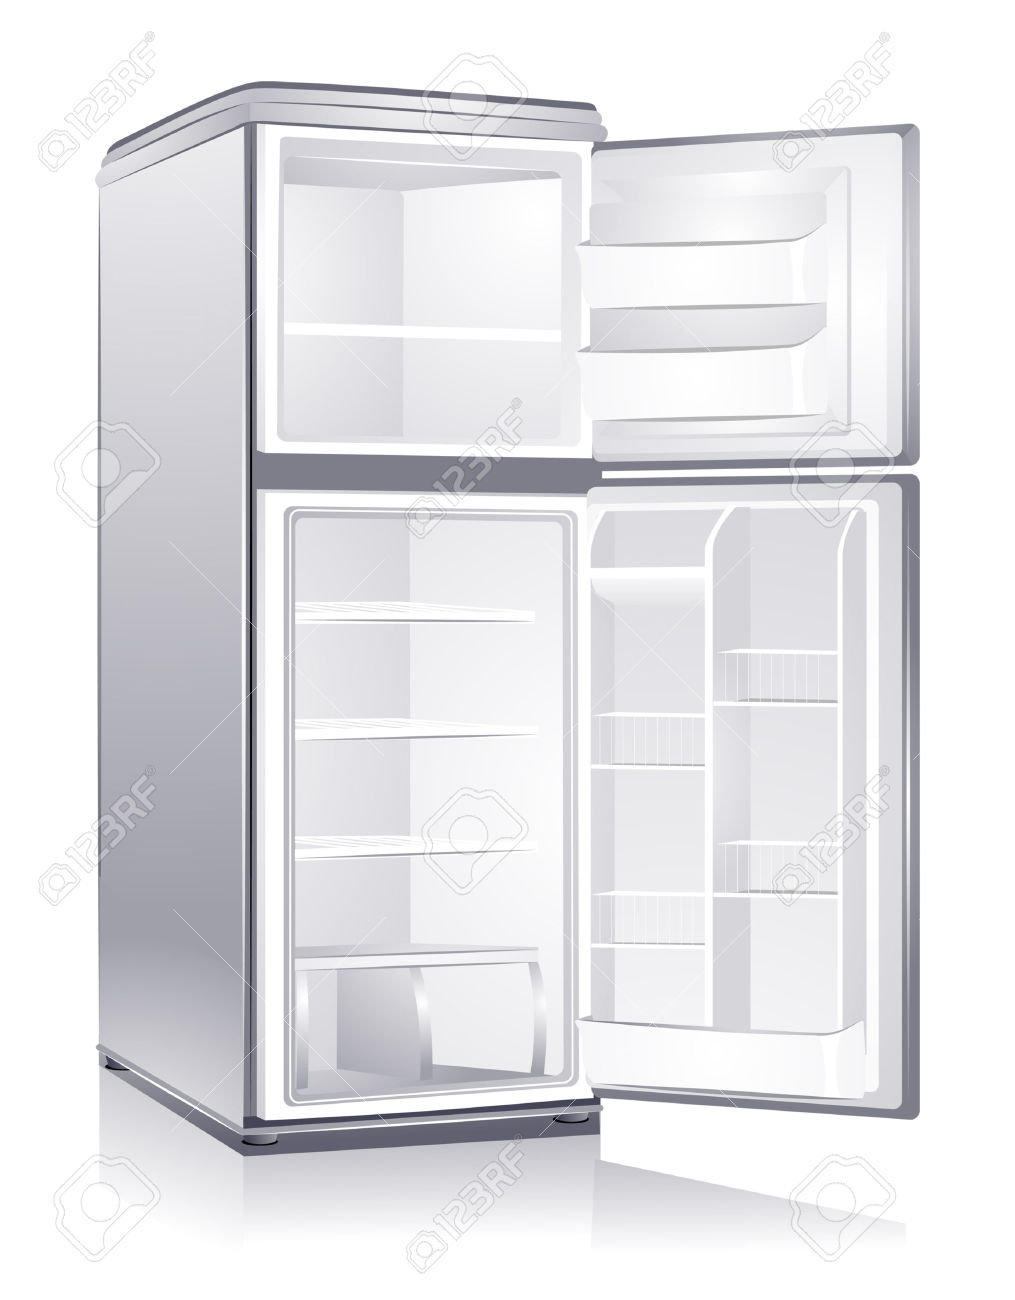 Collection of Refrigerator Open Cliparts (26) .